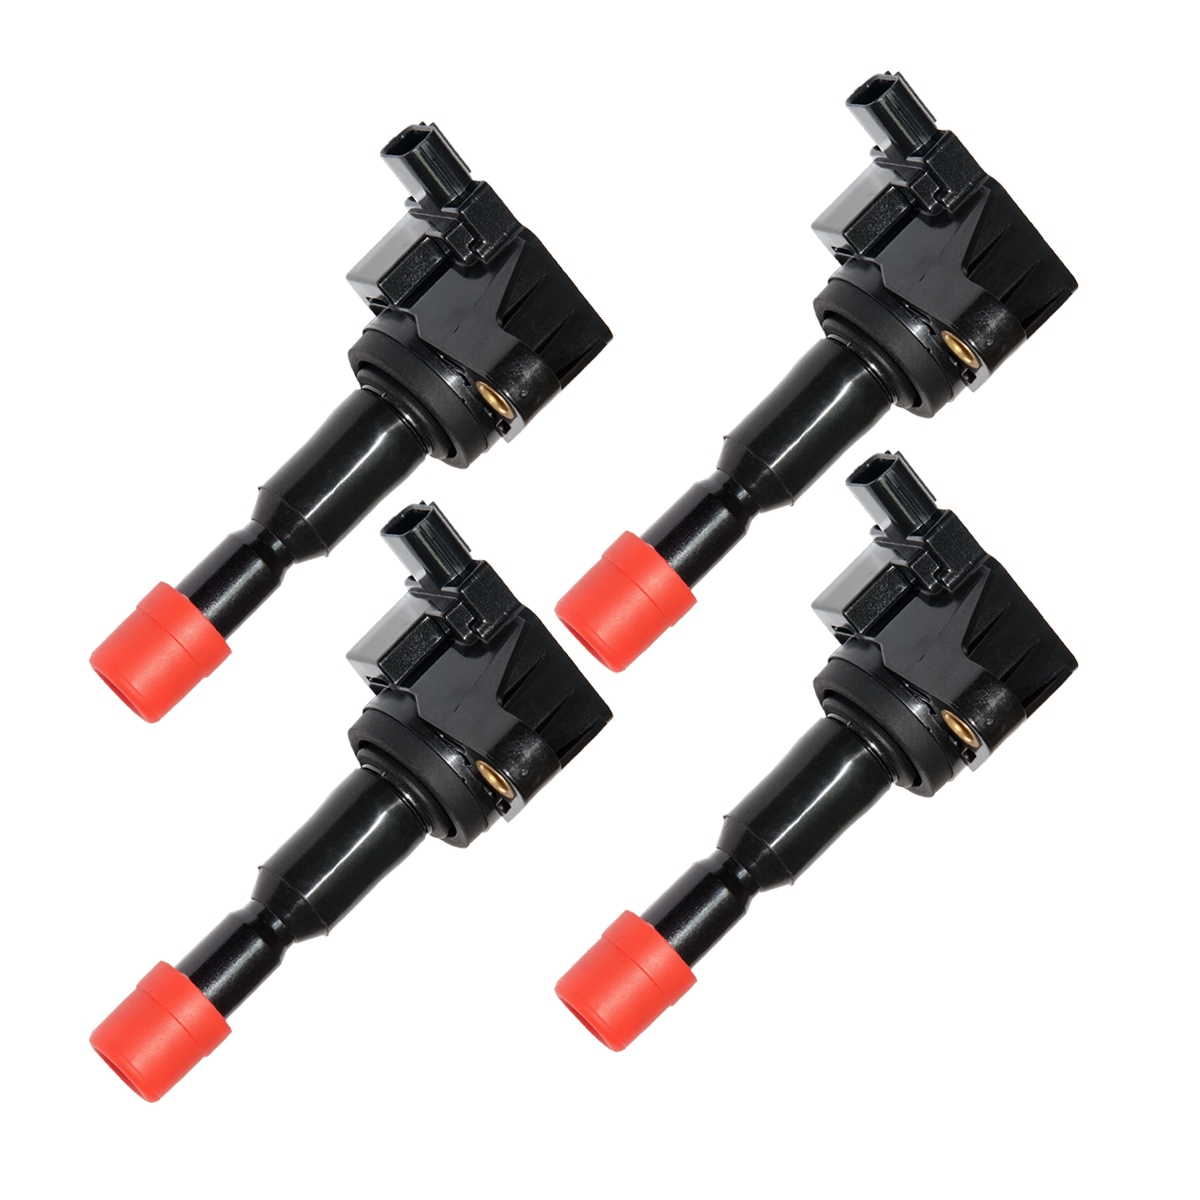 UF581 FOR HONDA FIT 1.5L IGNITION COIL 2007-2008  PACK OF 4 PREMIUM C1578